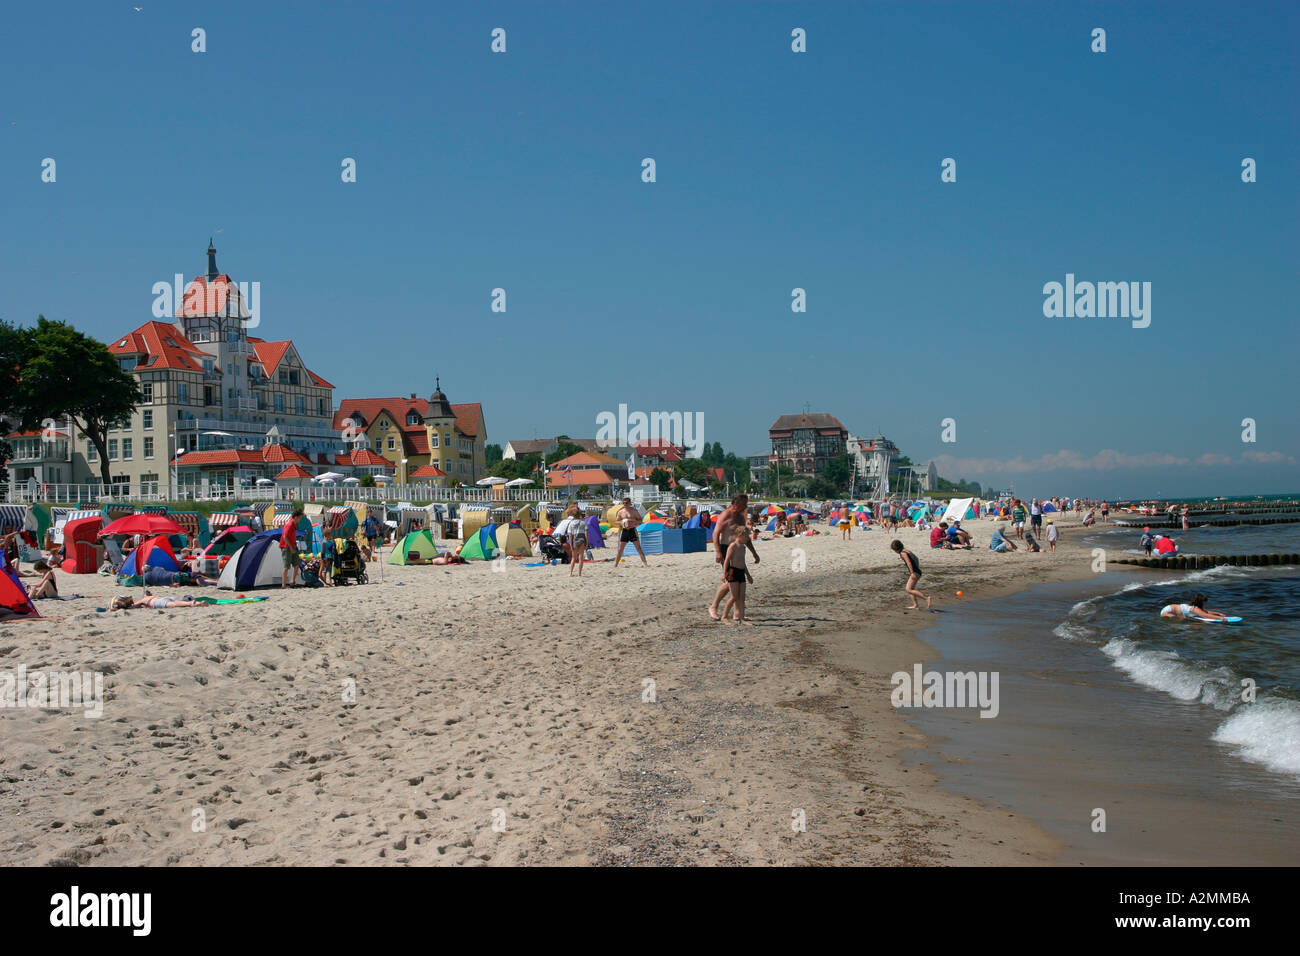 BRD Germany Mecklenburg Vorpommern Kühlungsborn at the beach people and hotels Stock Photo